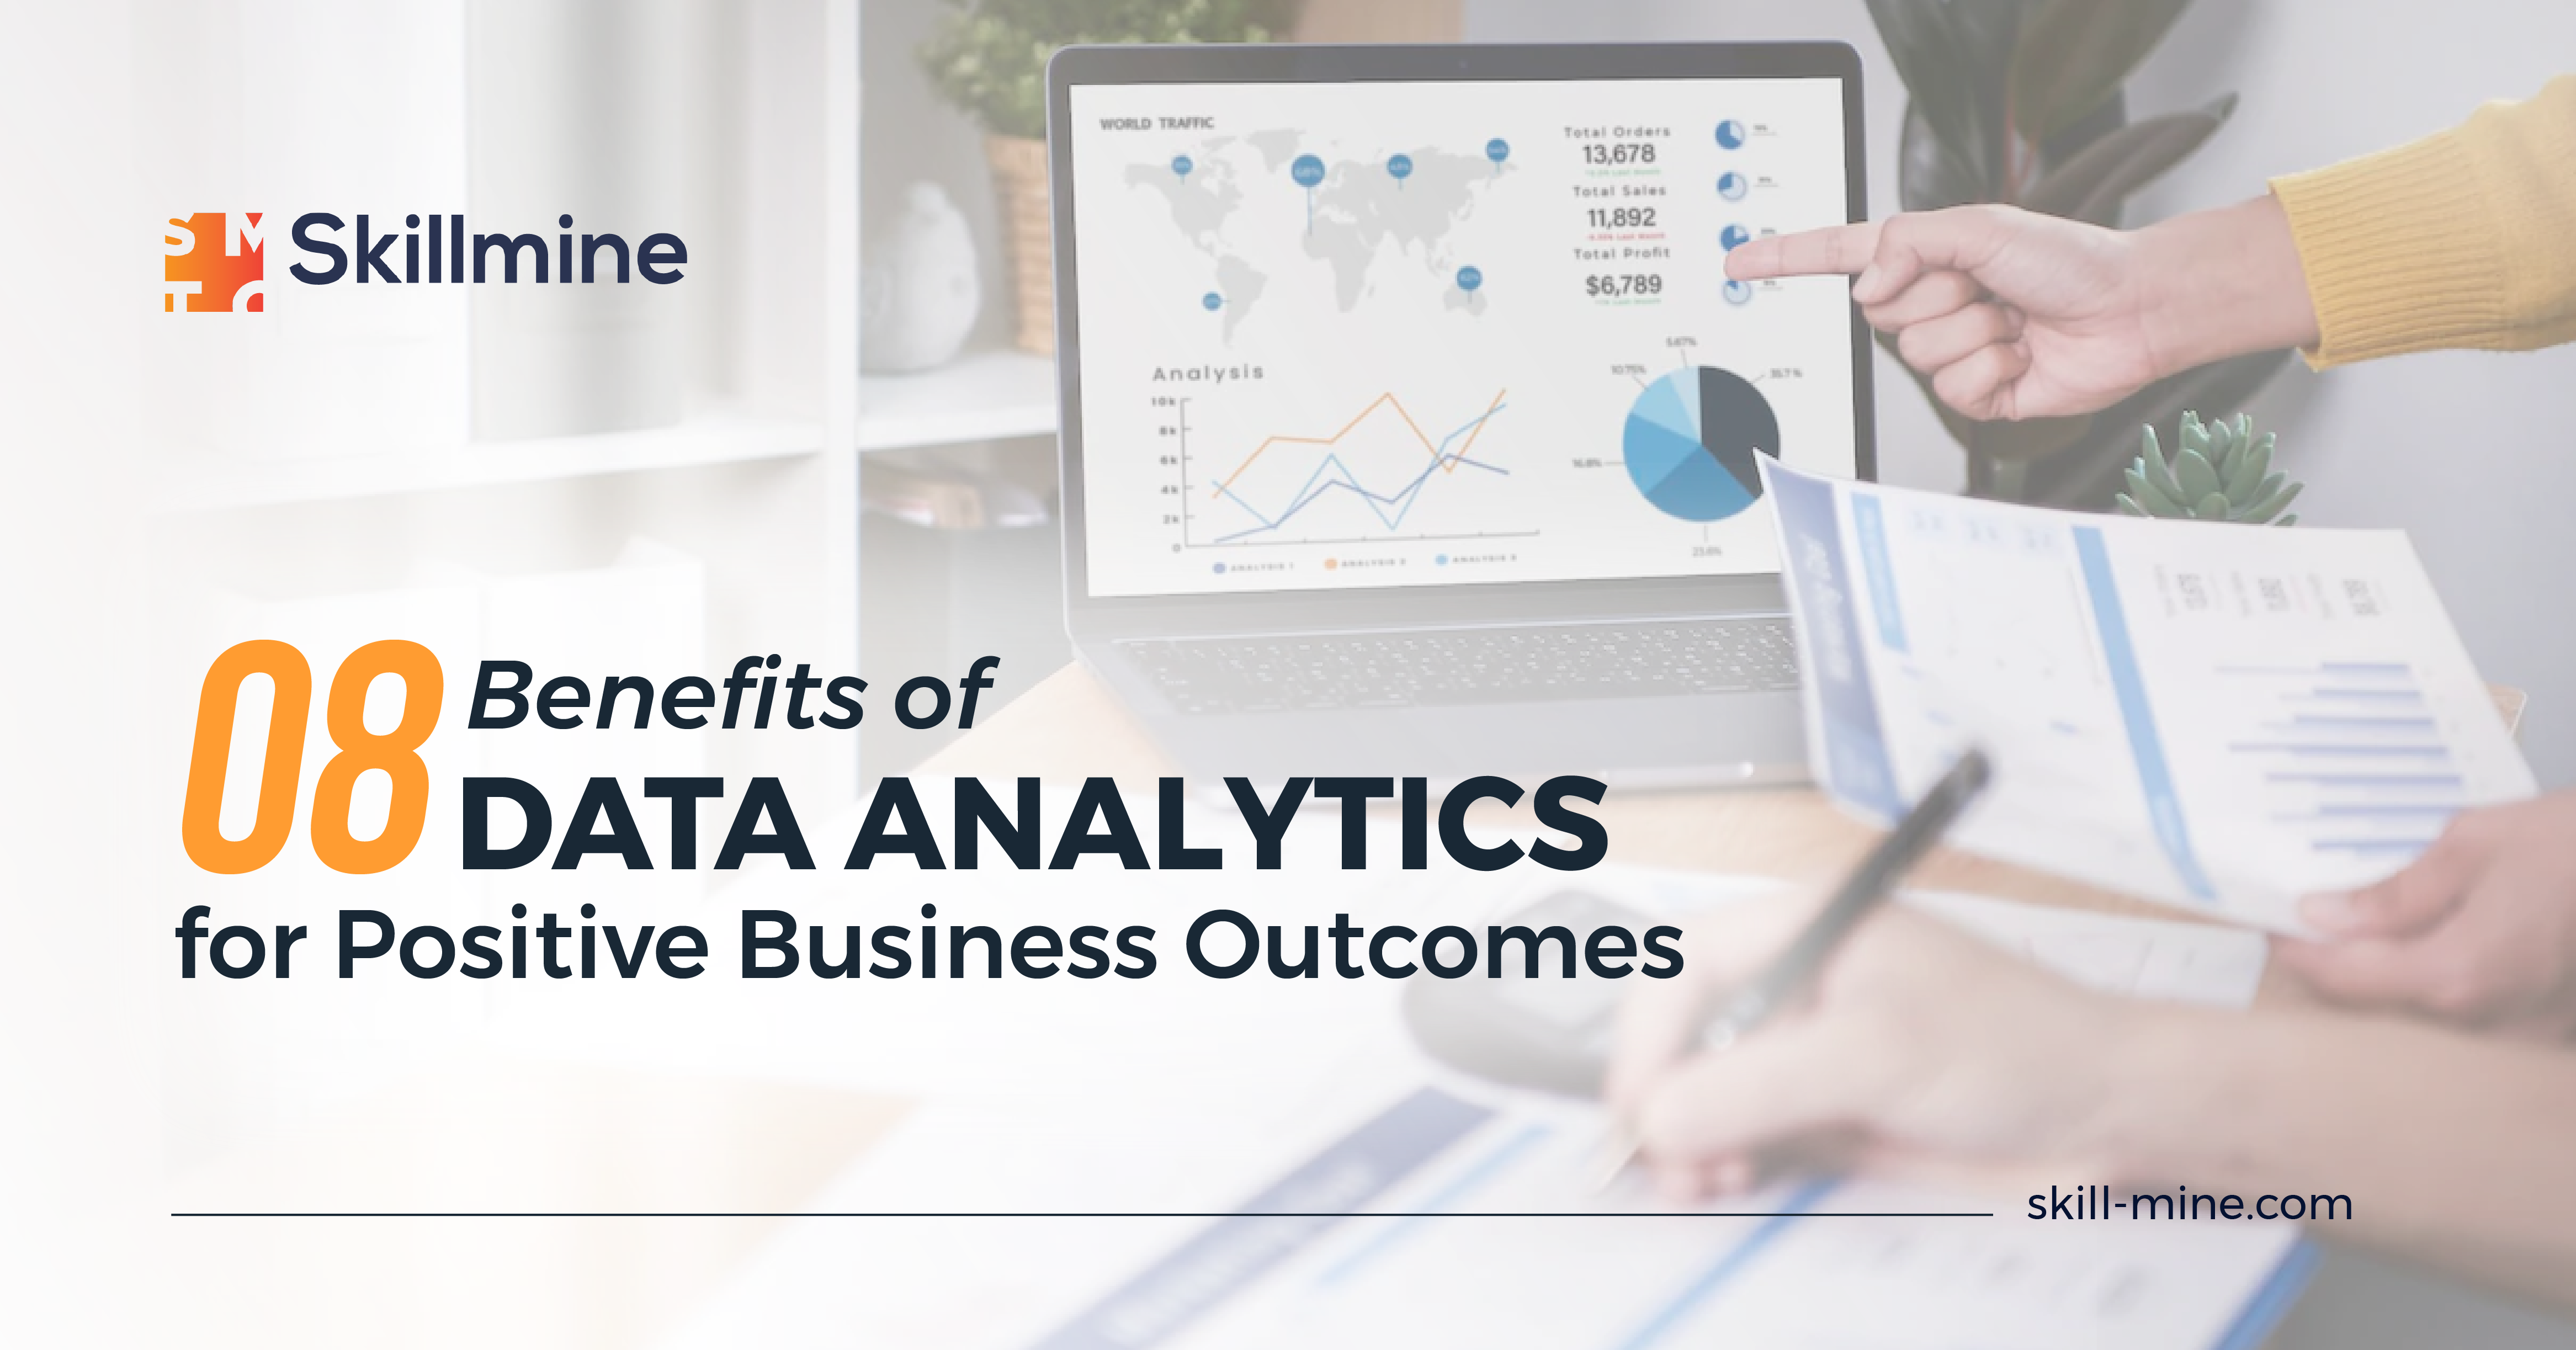 8 Benefits of Data Analytics for Positive Business Outcomes